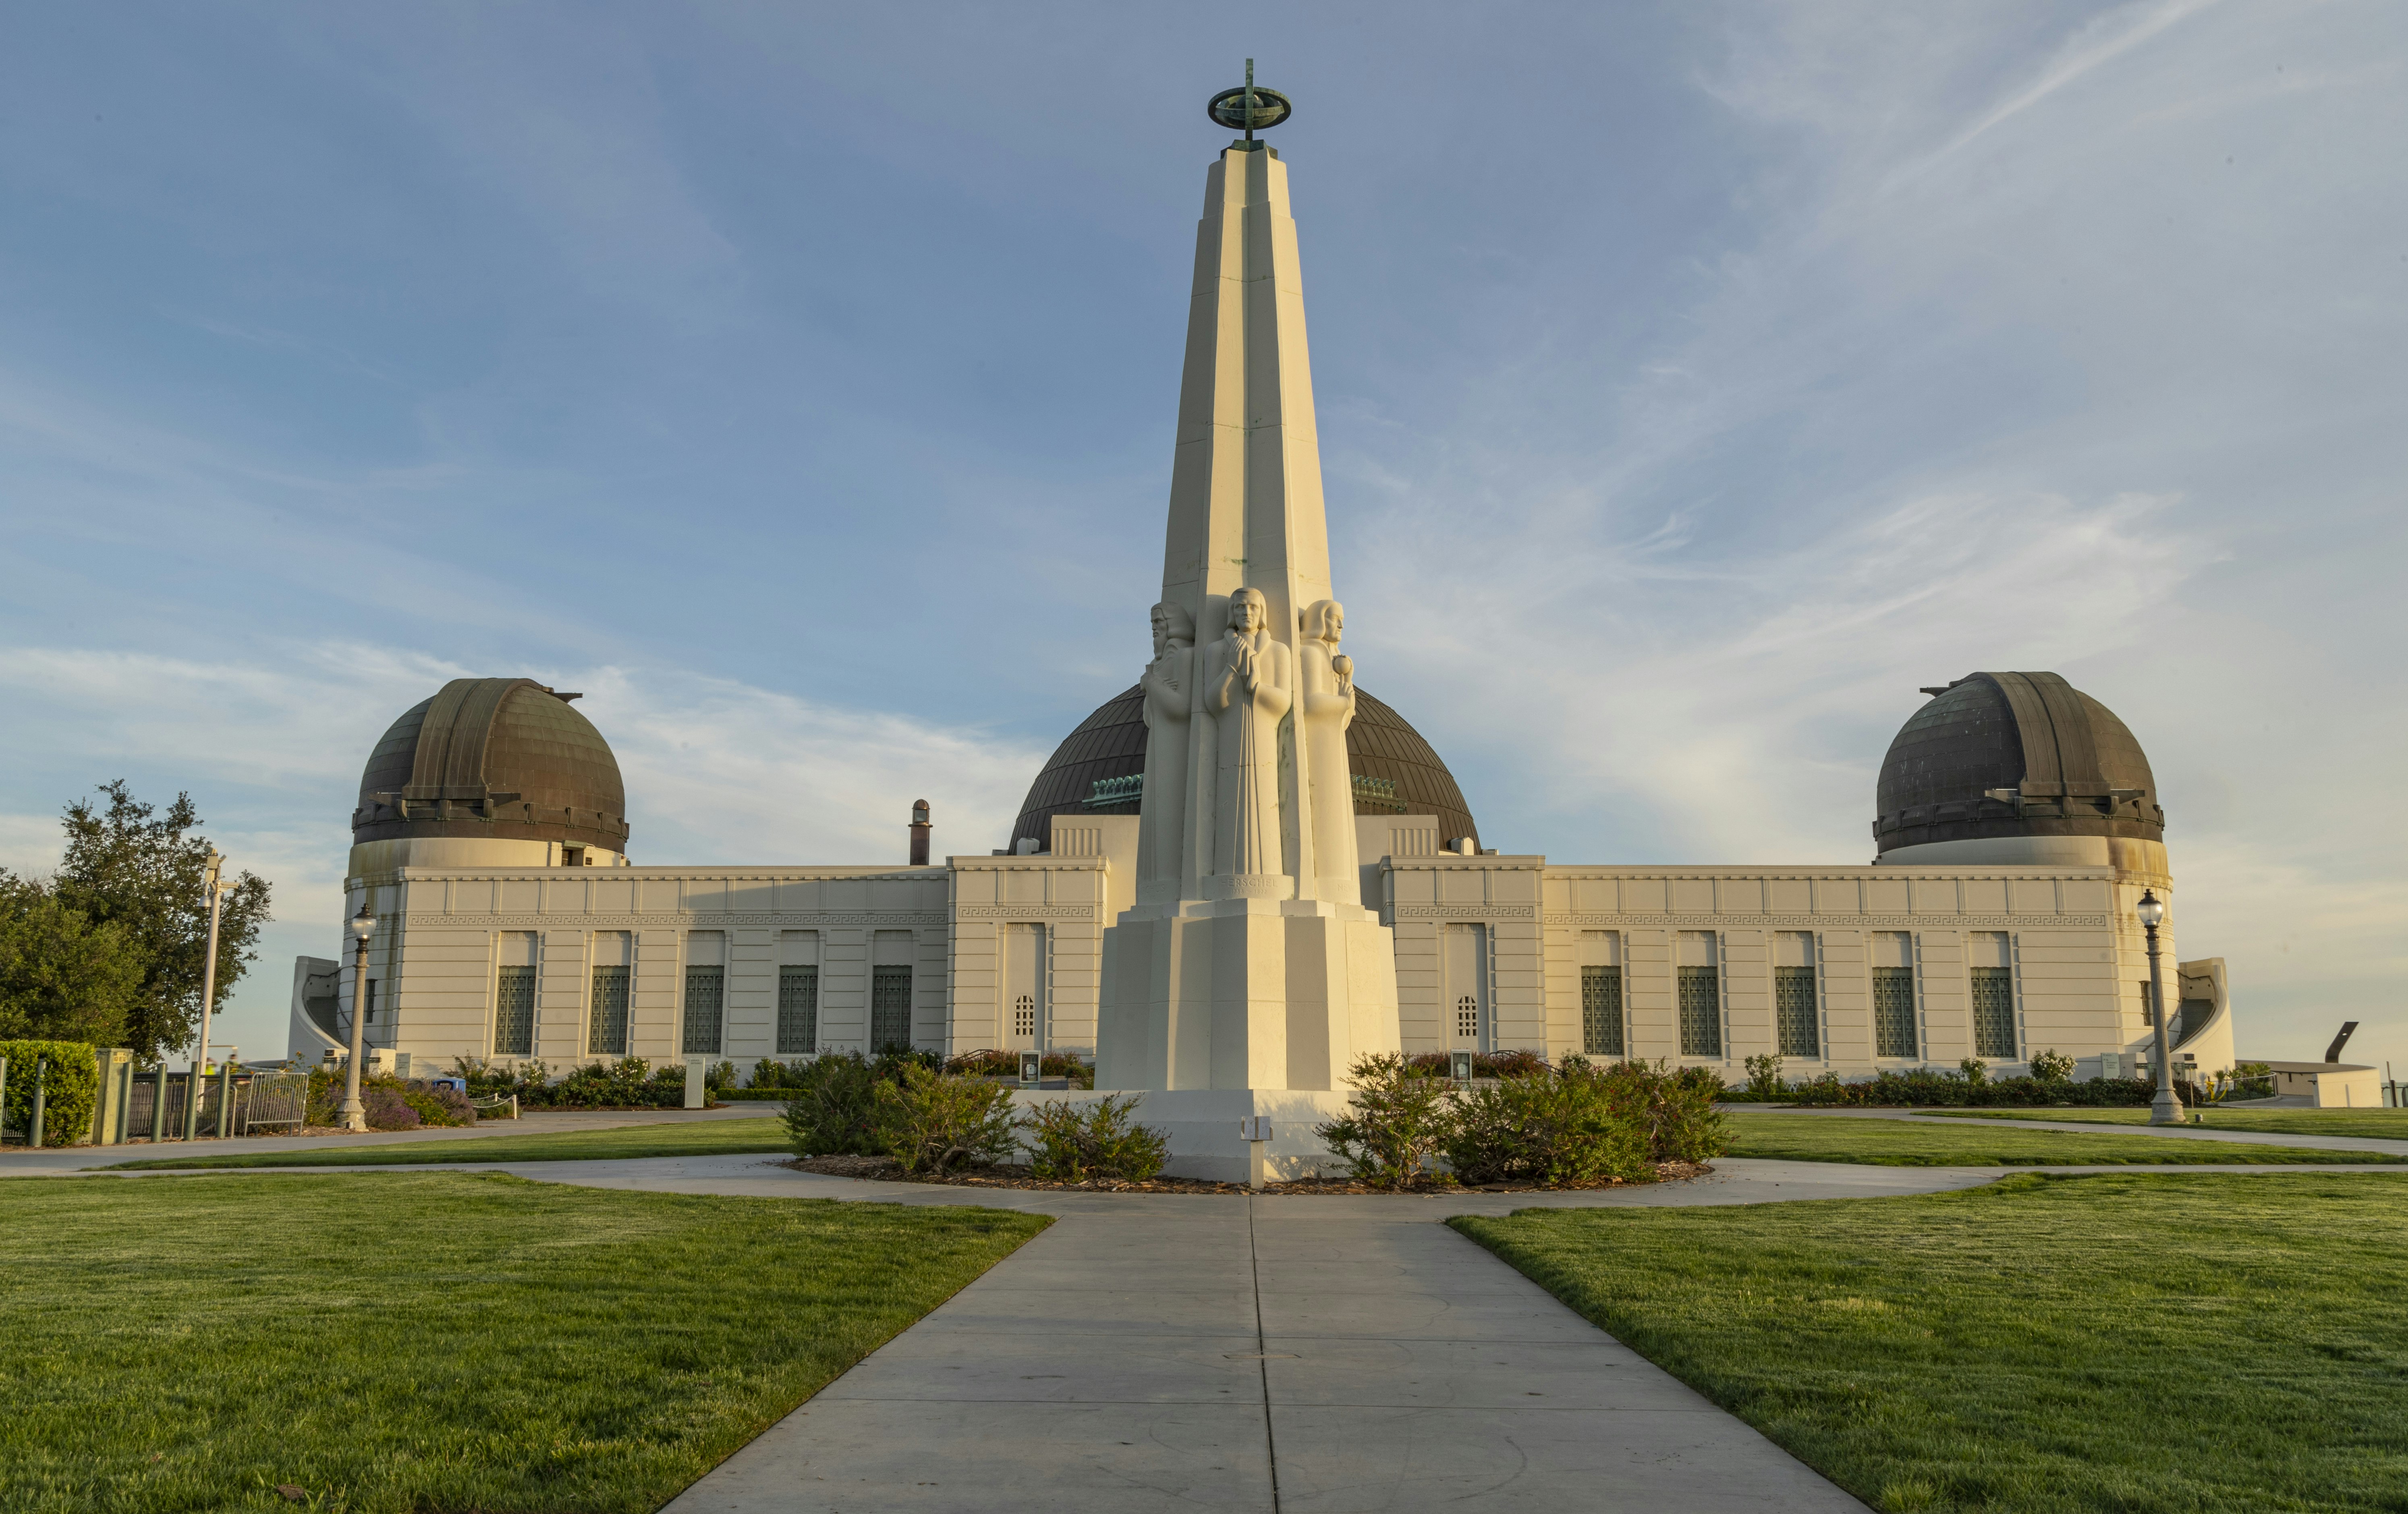 Exterior view of the Griffith Observatory, with a large outdoor concrete sculpture of a group of six people on all sides of the monument.